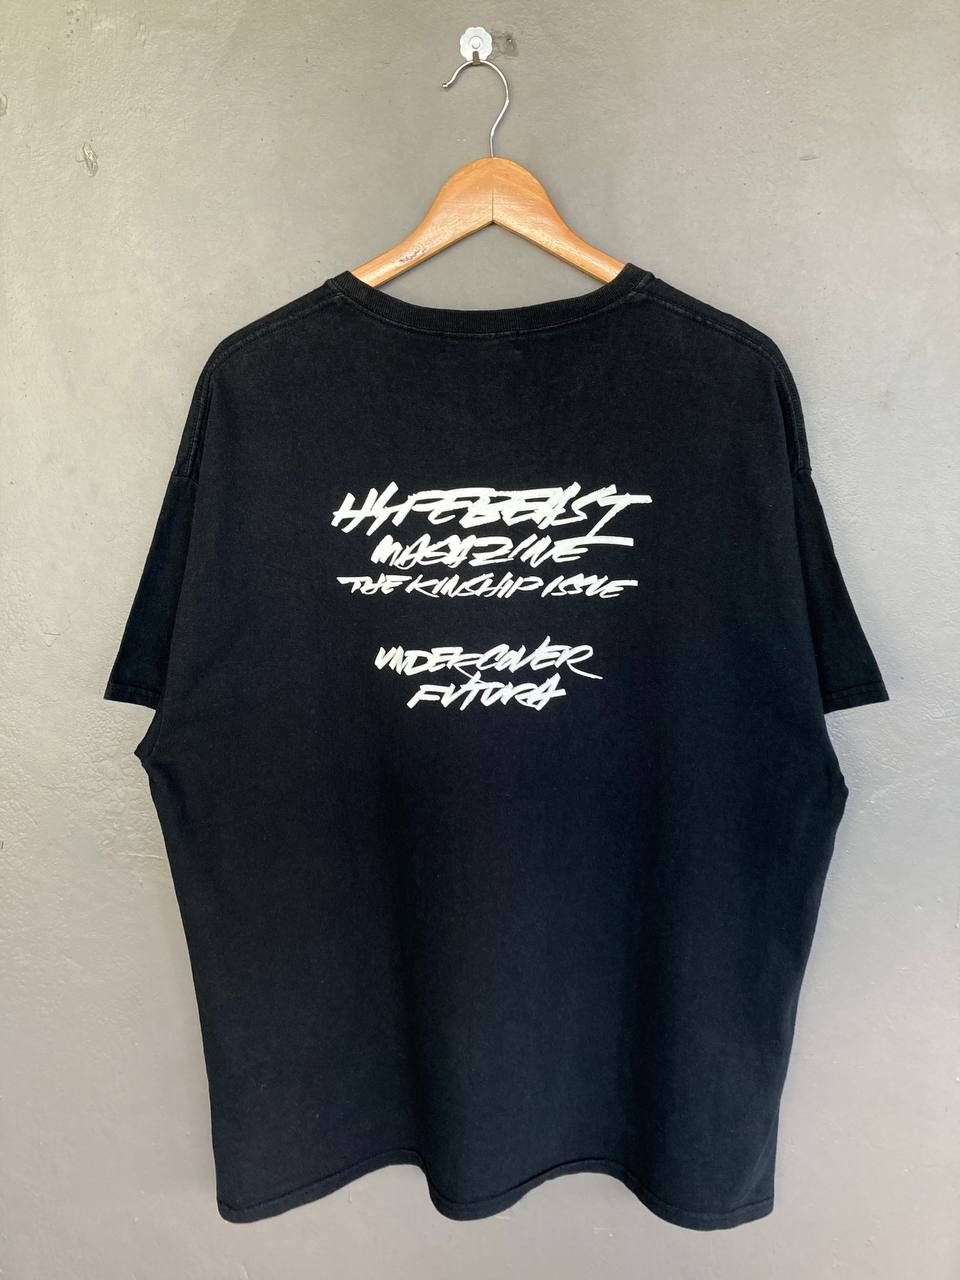 SS19 Undercover x Futura “The Kinship Issue” Tee - 2